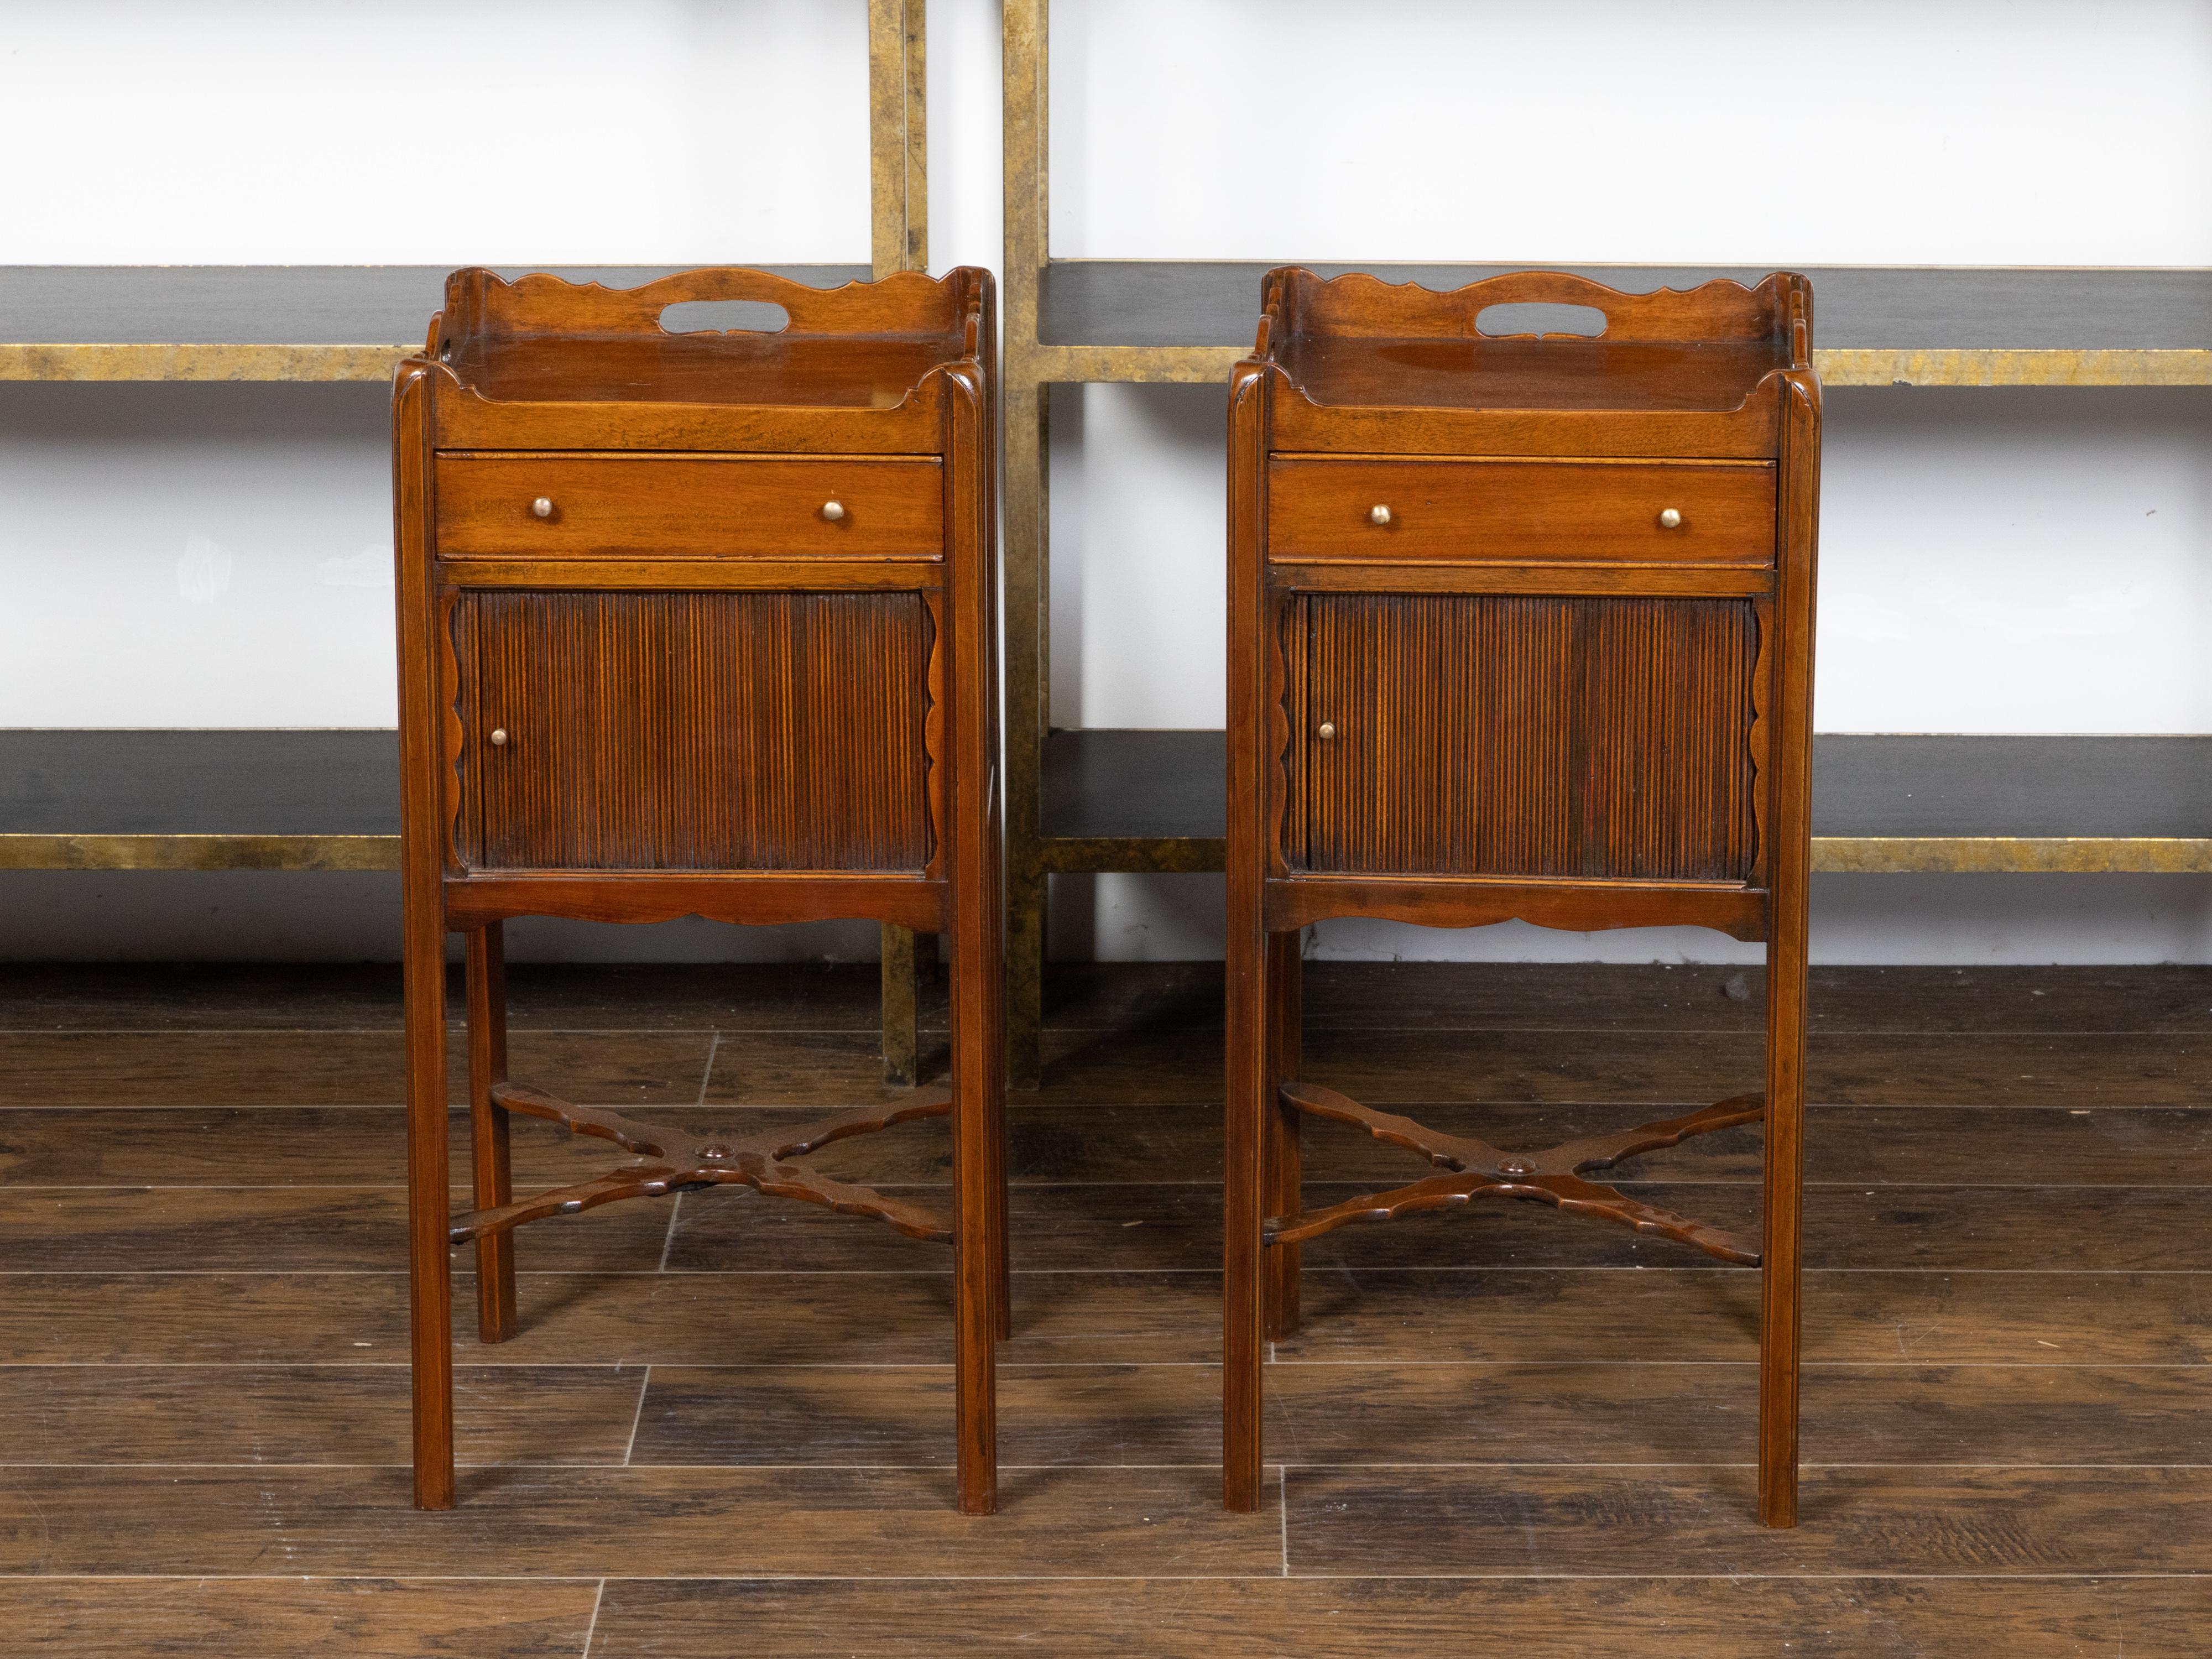 A pair of English mahogany bedside tables from the early 20th century, with tray top, single drawer, tambour door and carved X-Form stretcher. Created in England during the turn the century that saw the transition of the 19th to the 20th century,